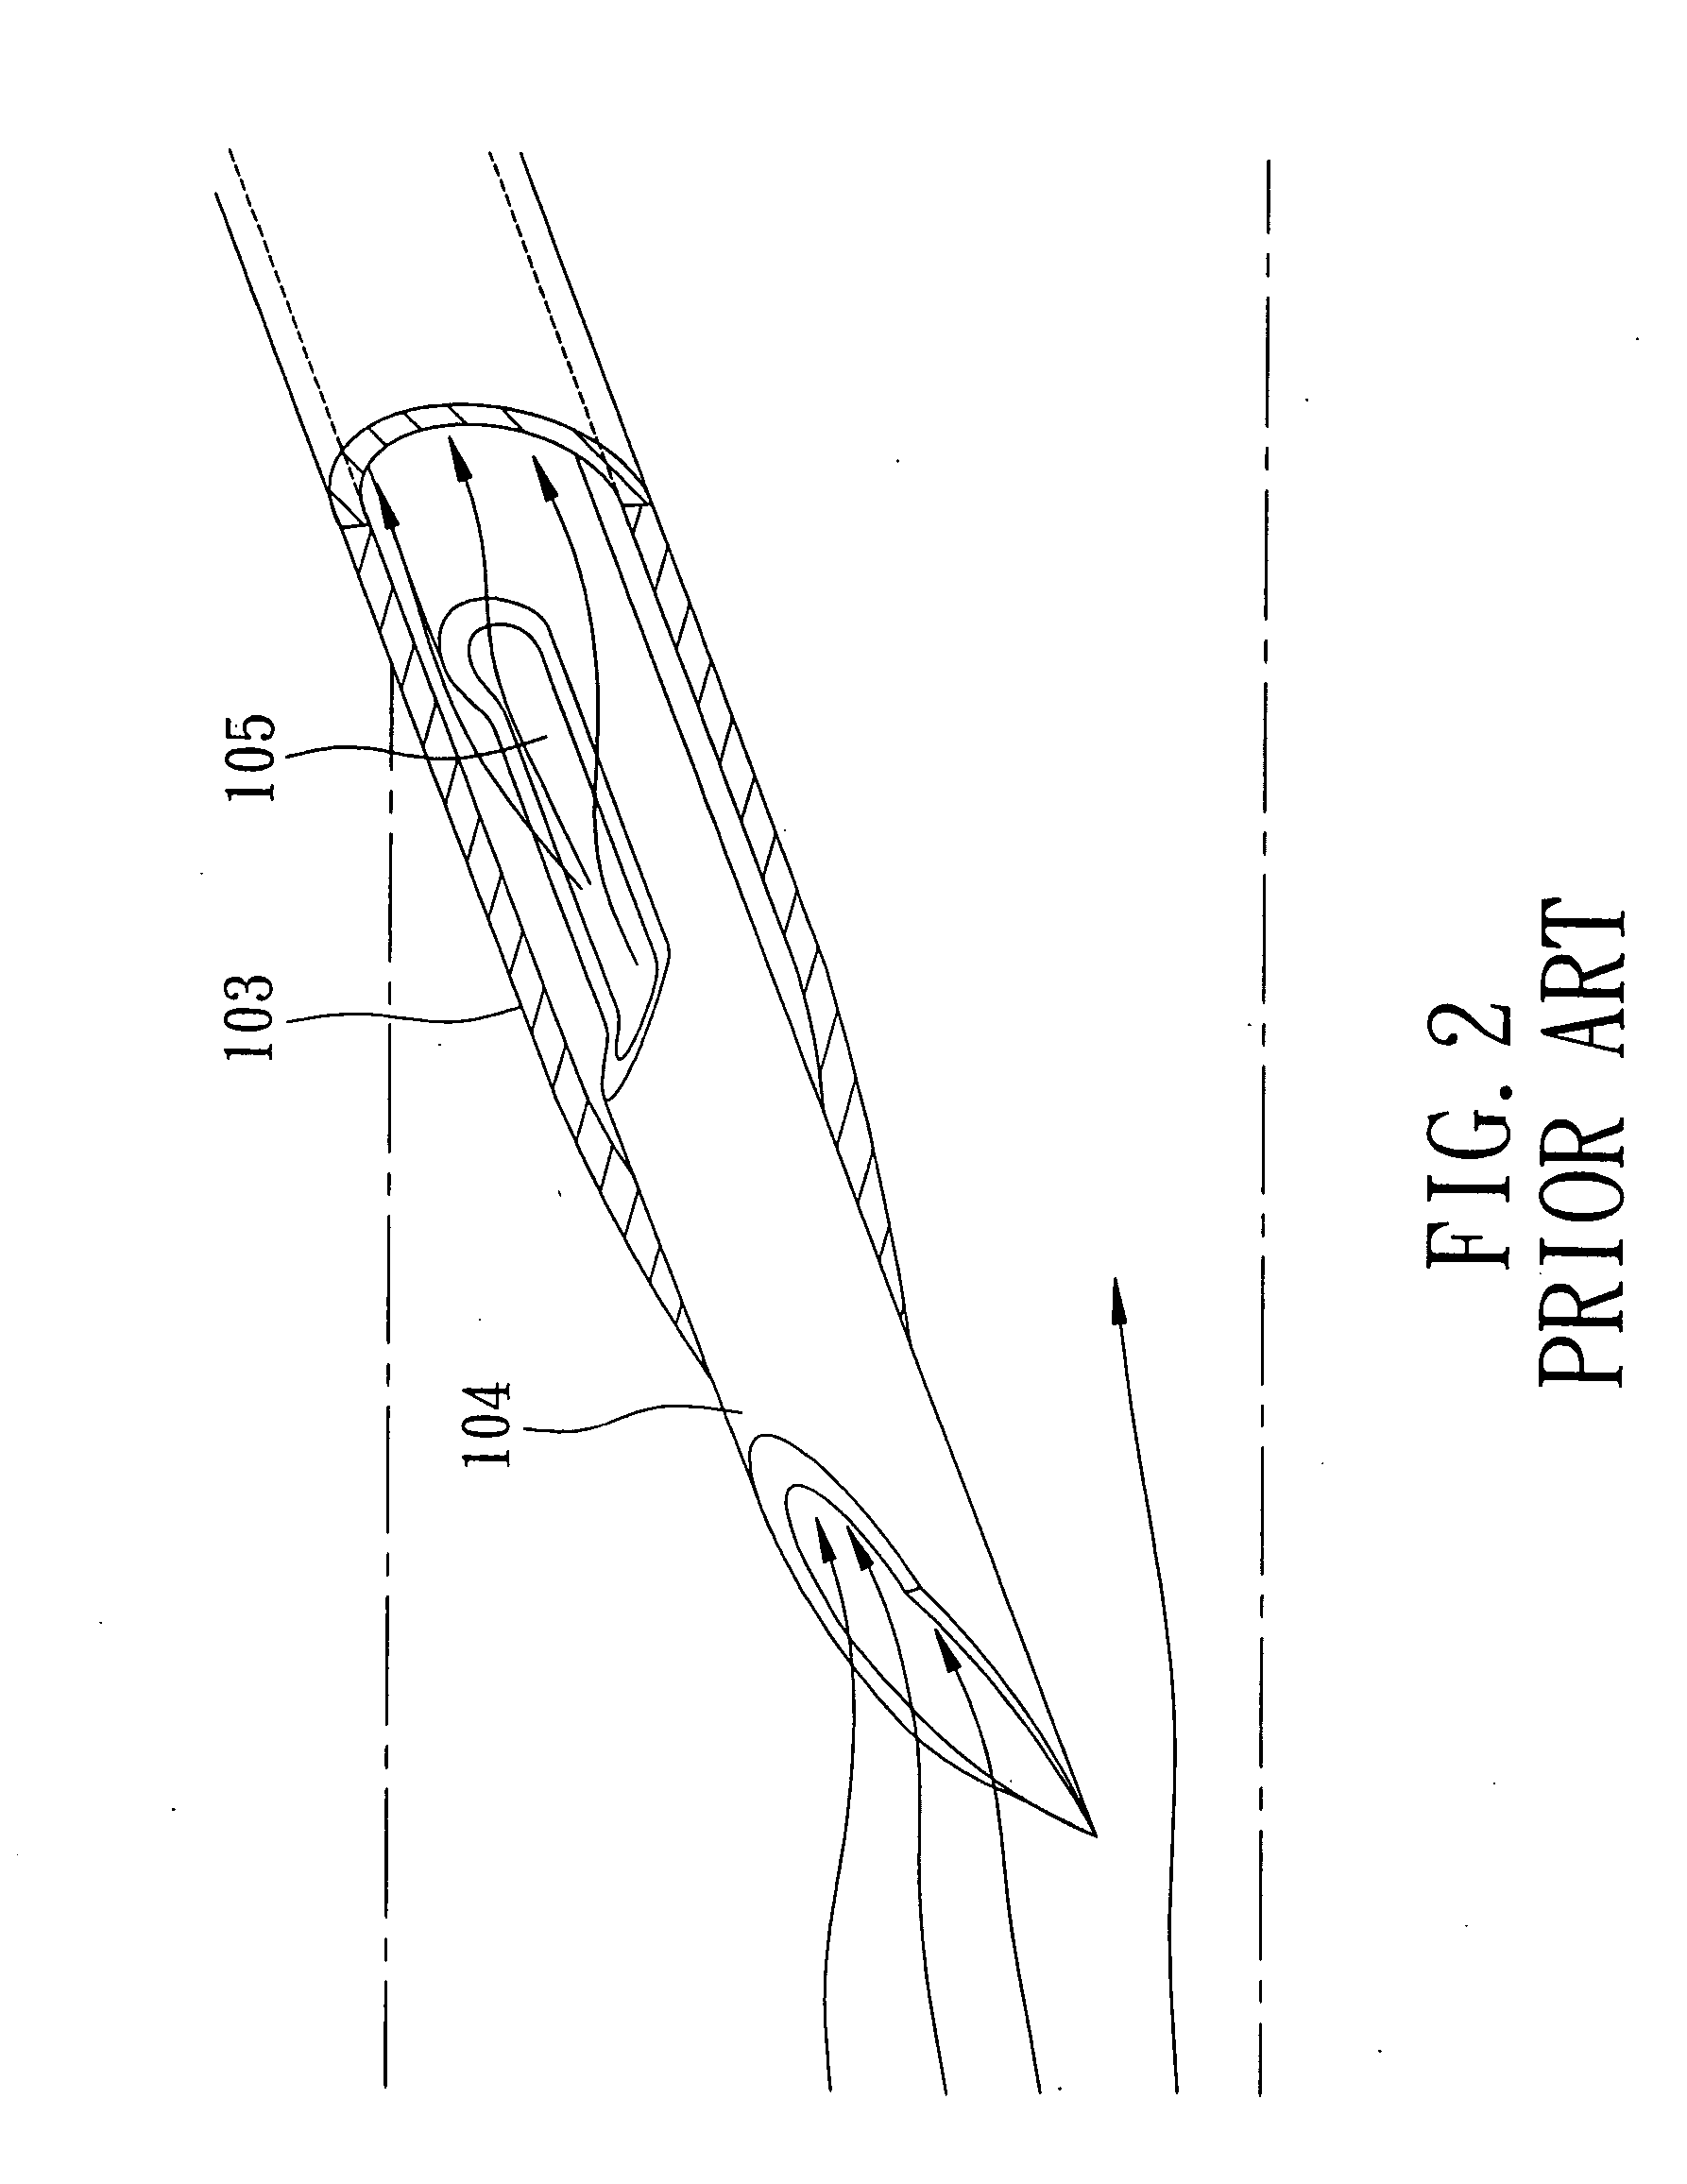 Intravenous catheter introducing device with a tubular outlet member